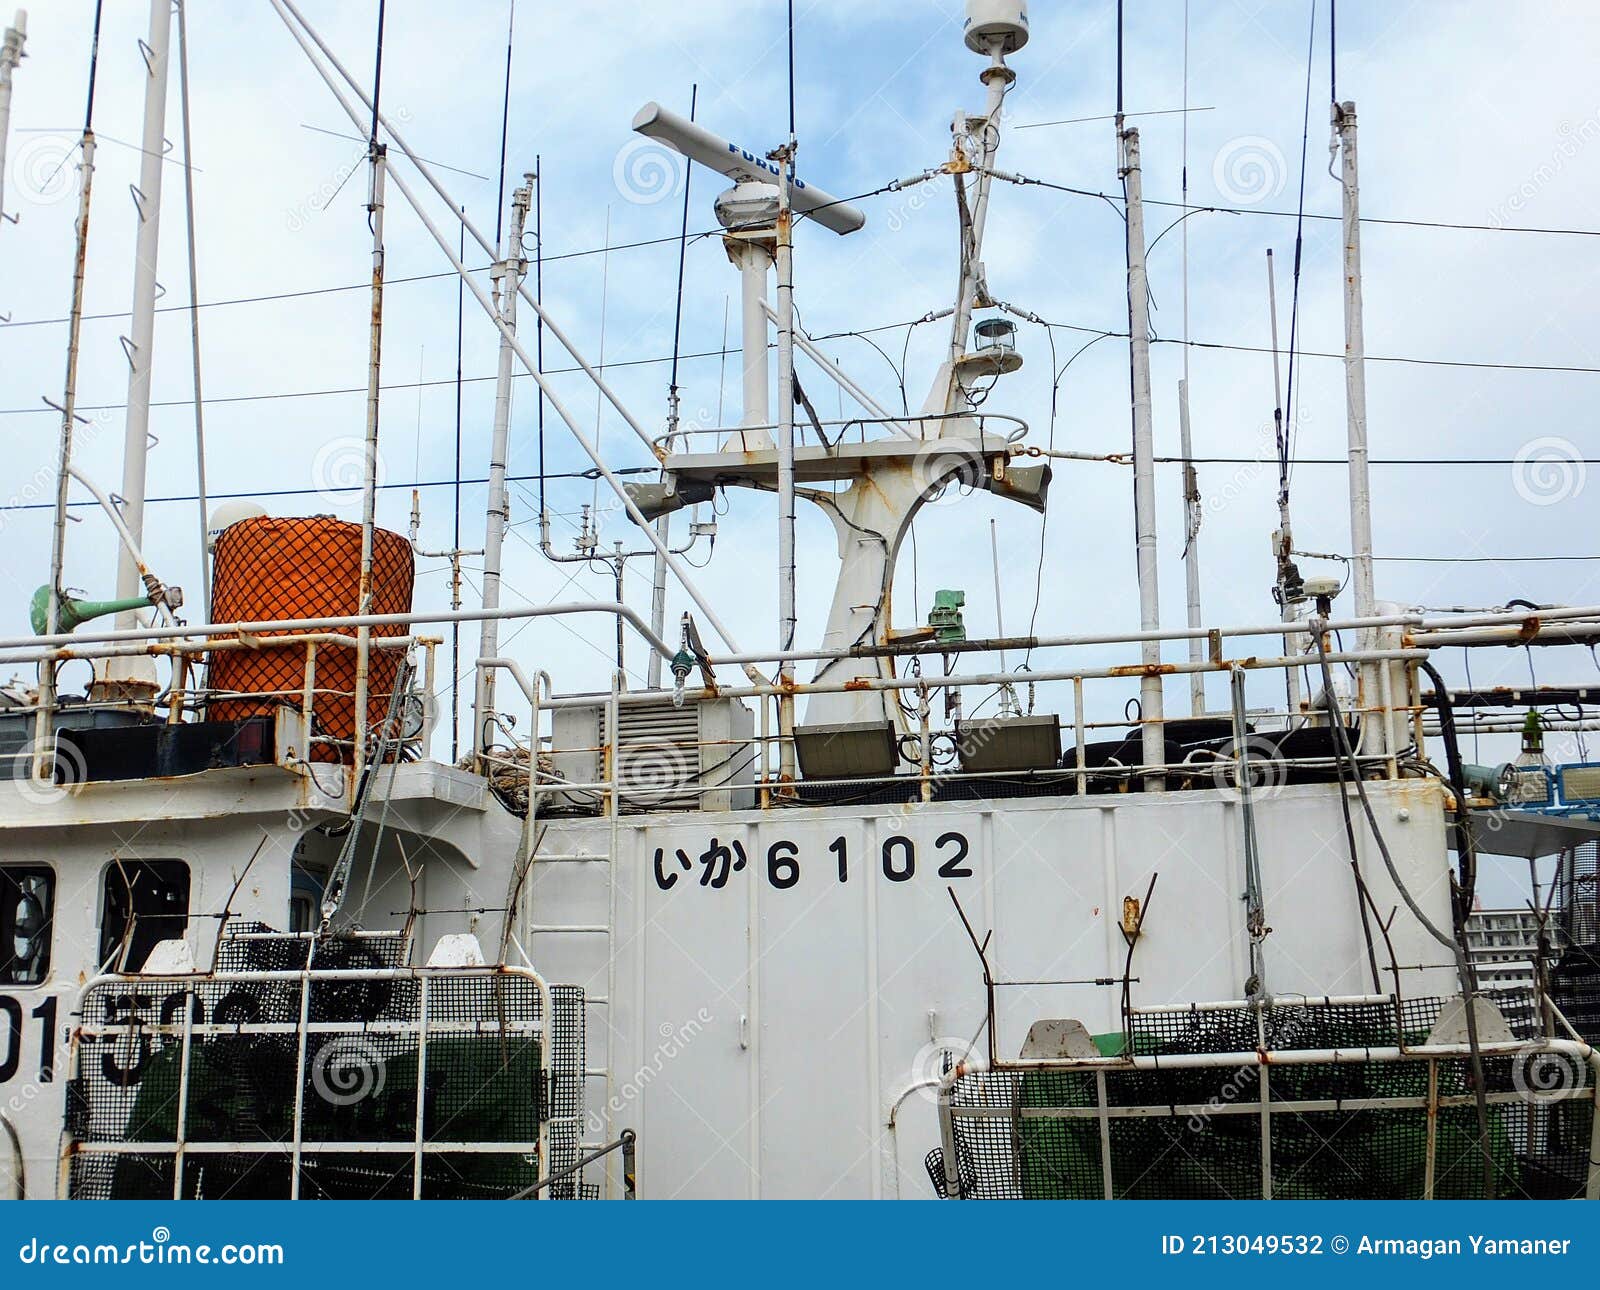 The Radar and Antenna Gear of a Fishing Boat Stock Photo - Image of fishing,  warship: 213049532